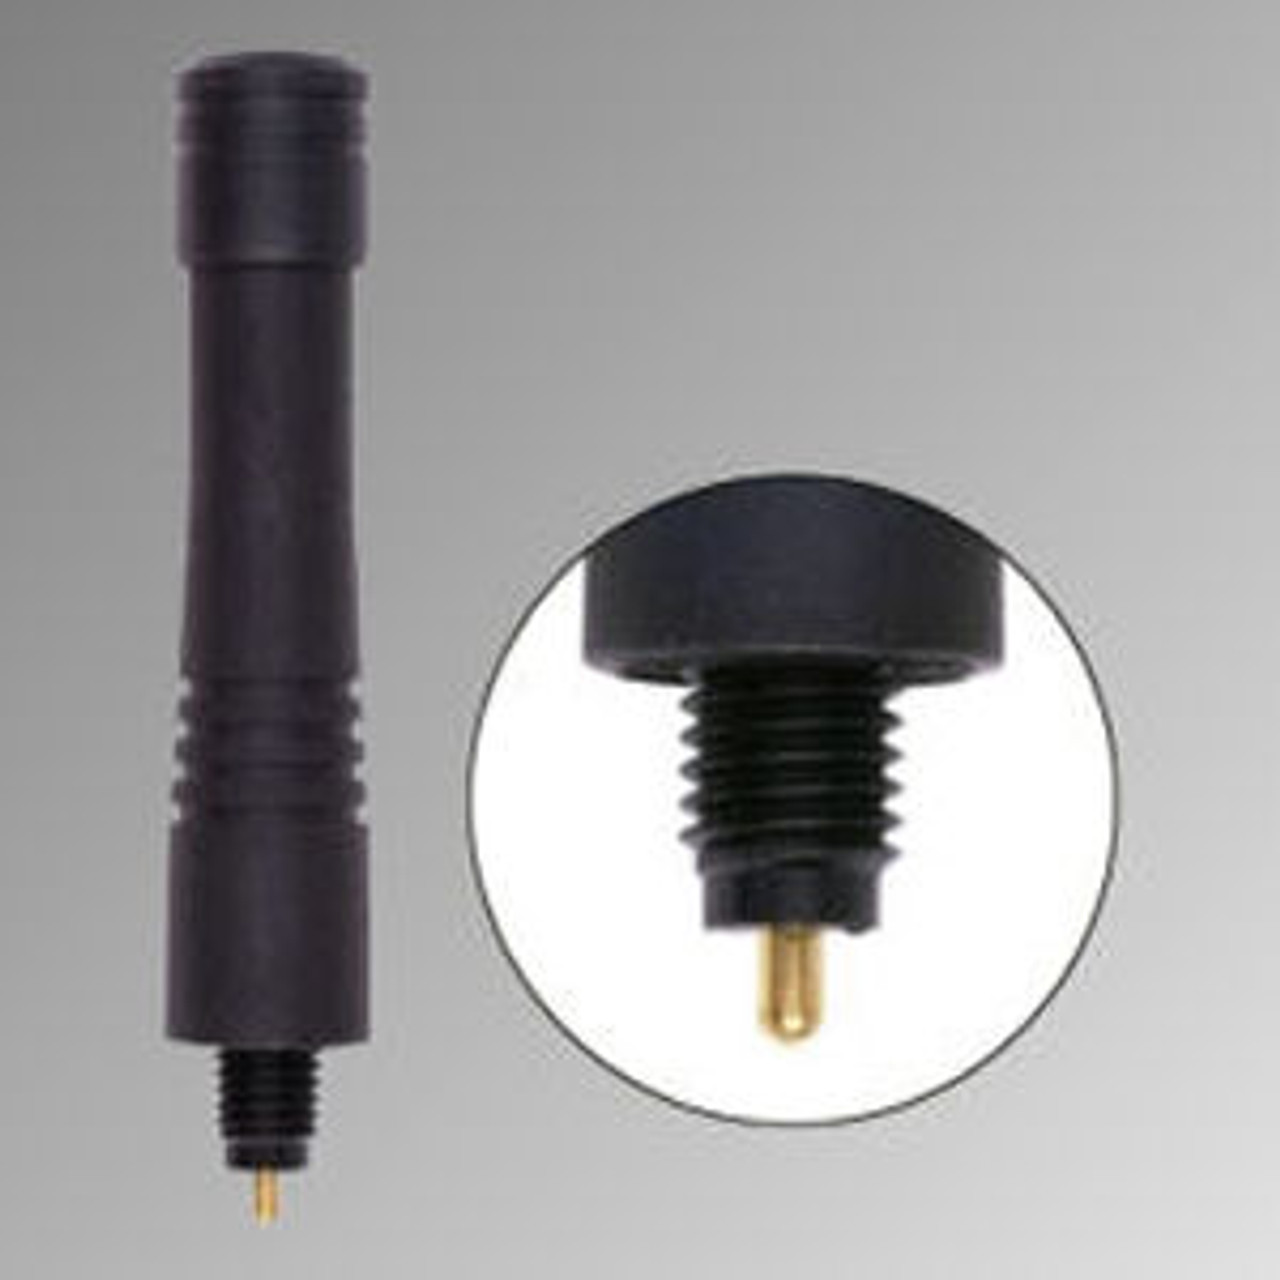 Replacement For M/A-Com KRE1011219/13 Antenna - 3.75", UHF, 450-470 MHz